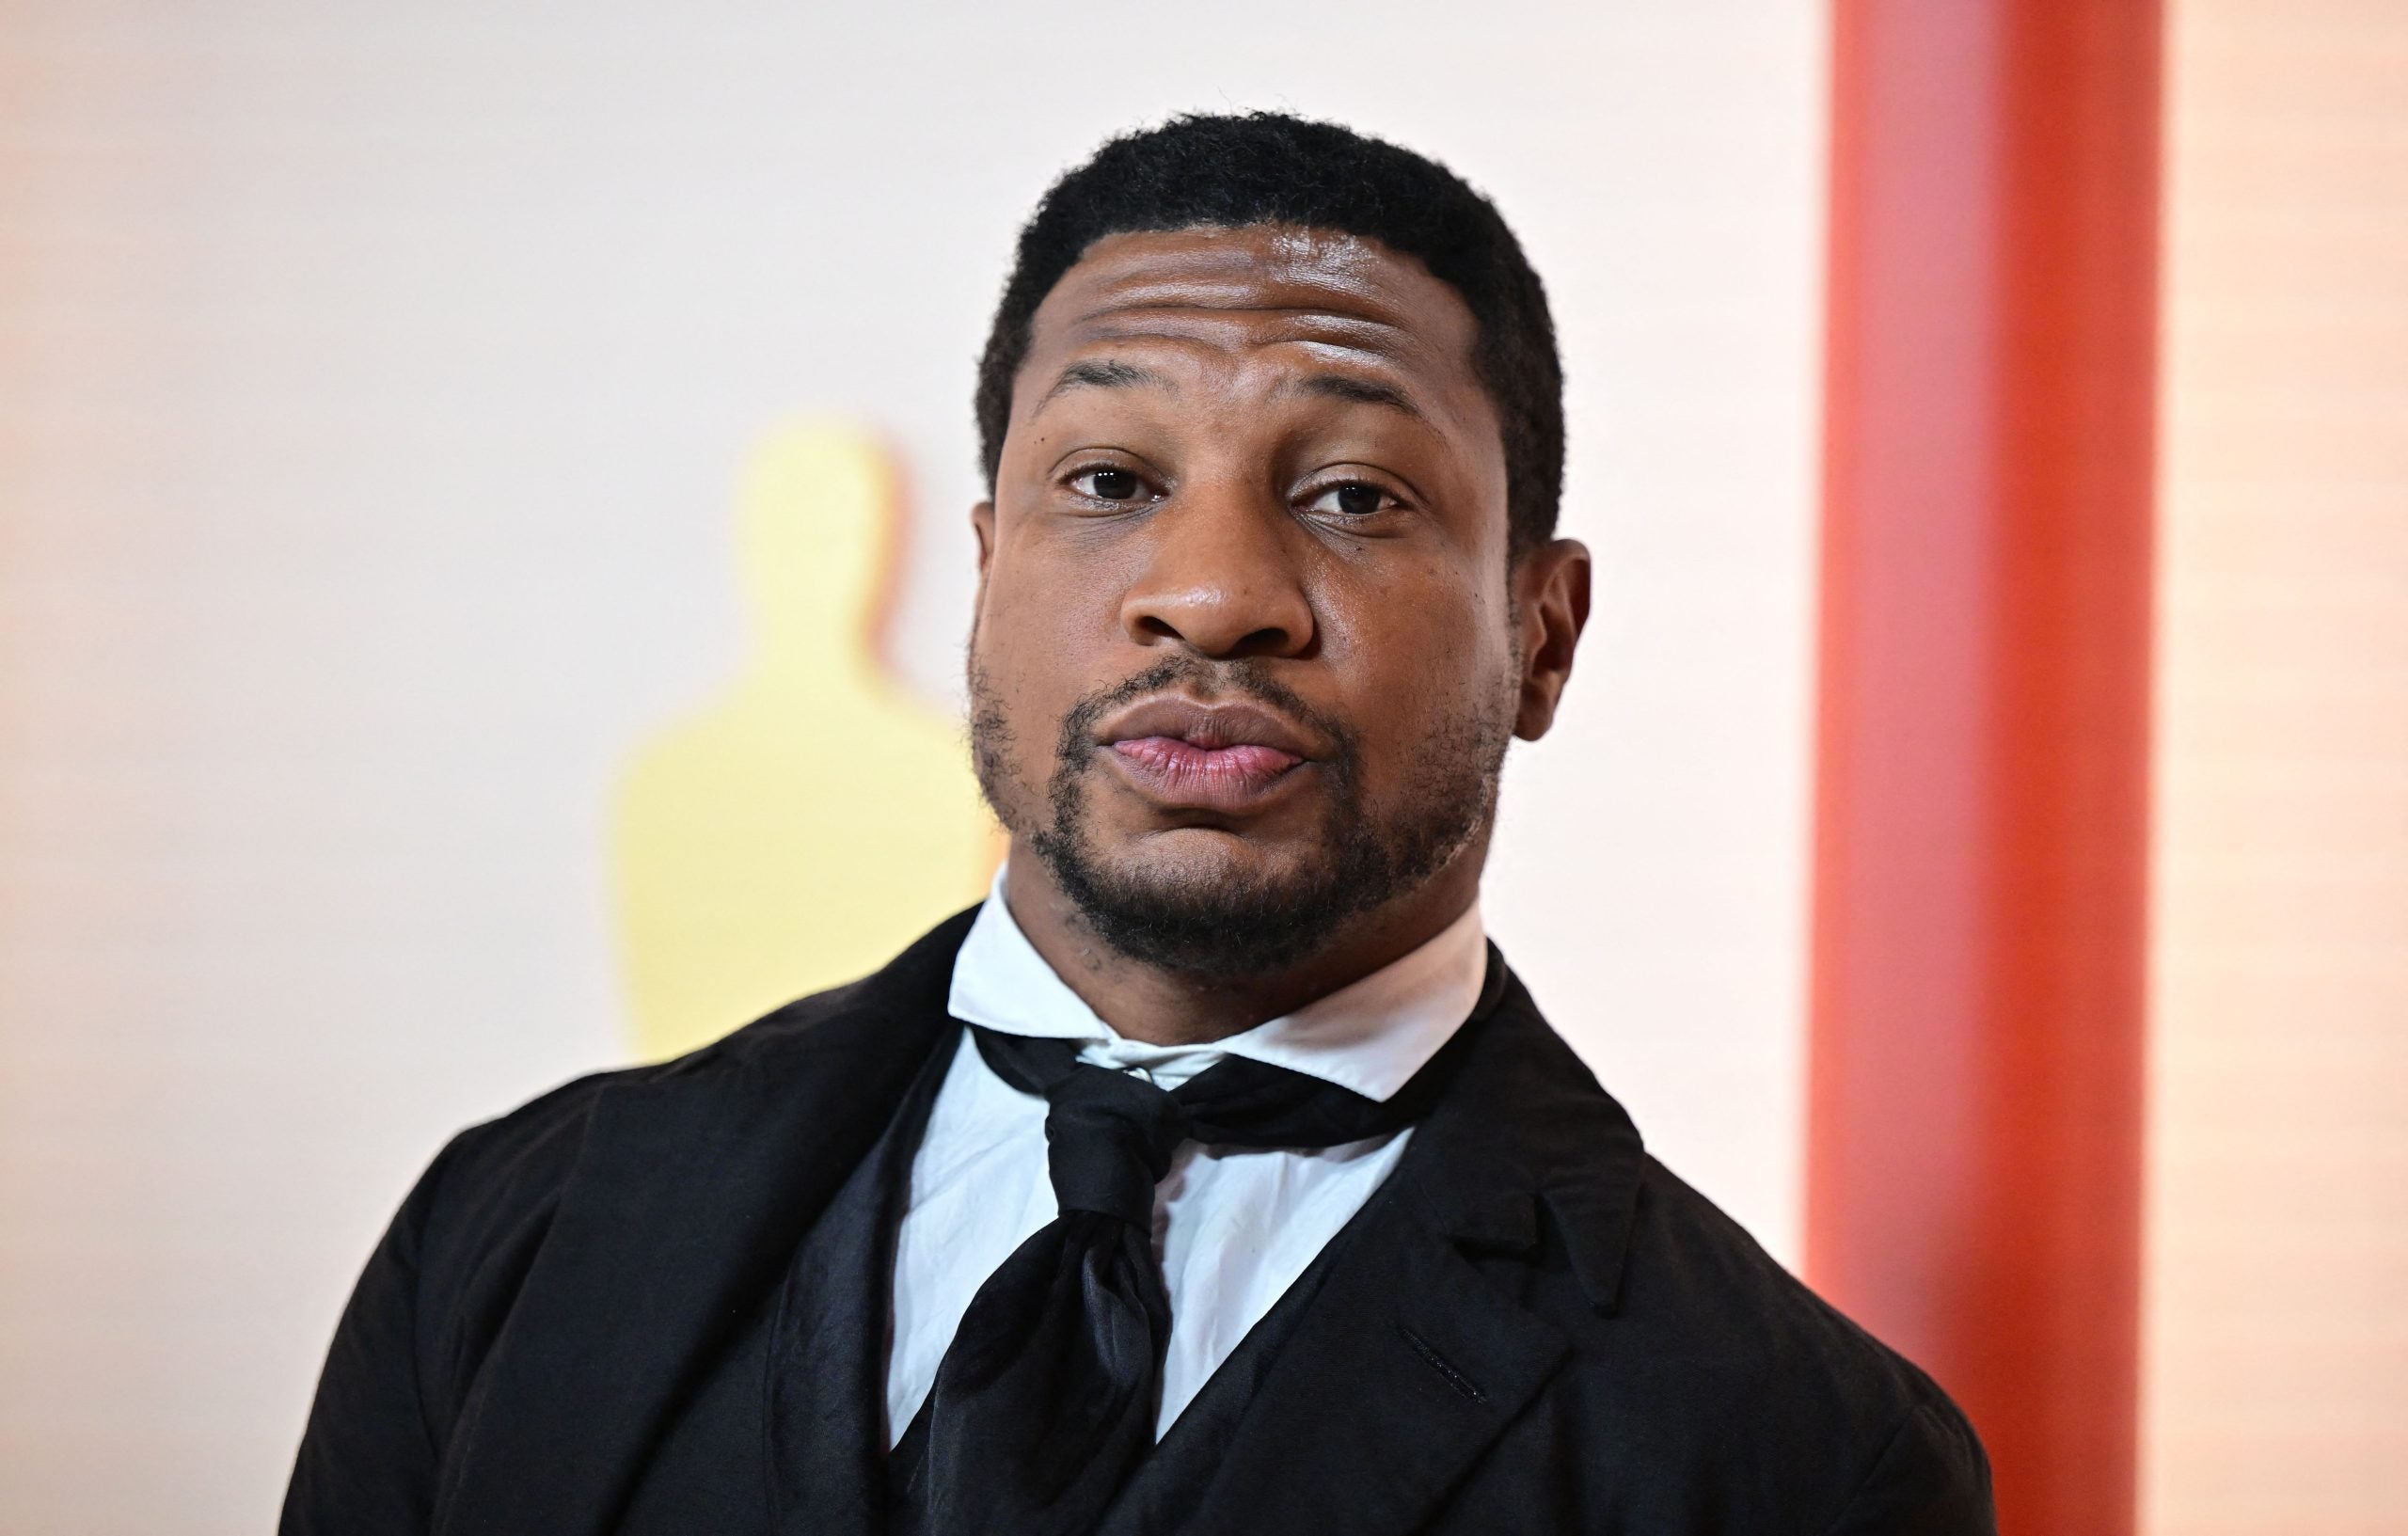 Jonathan Majors Says He Was “Shocked” At Guilty Verdict In First Interview Since Assault Trial